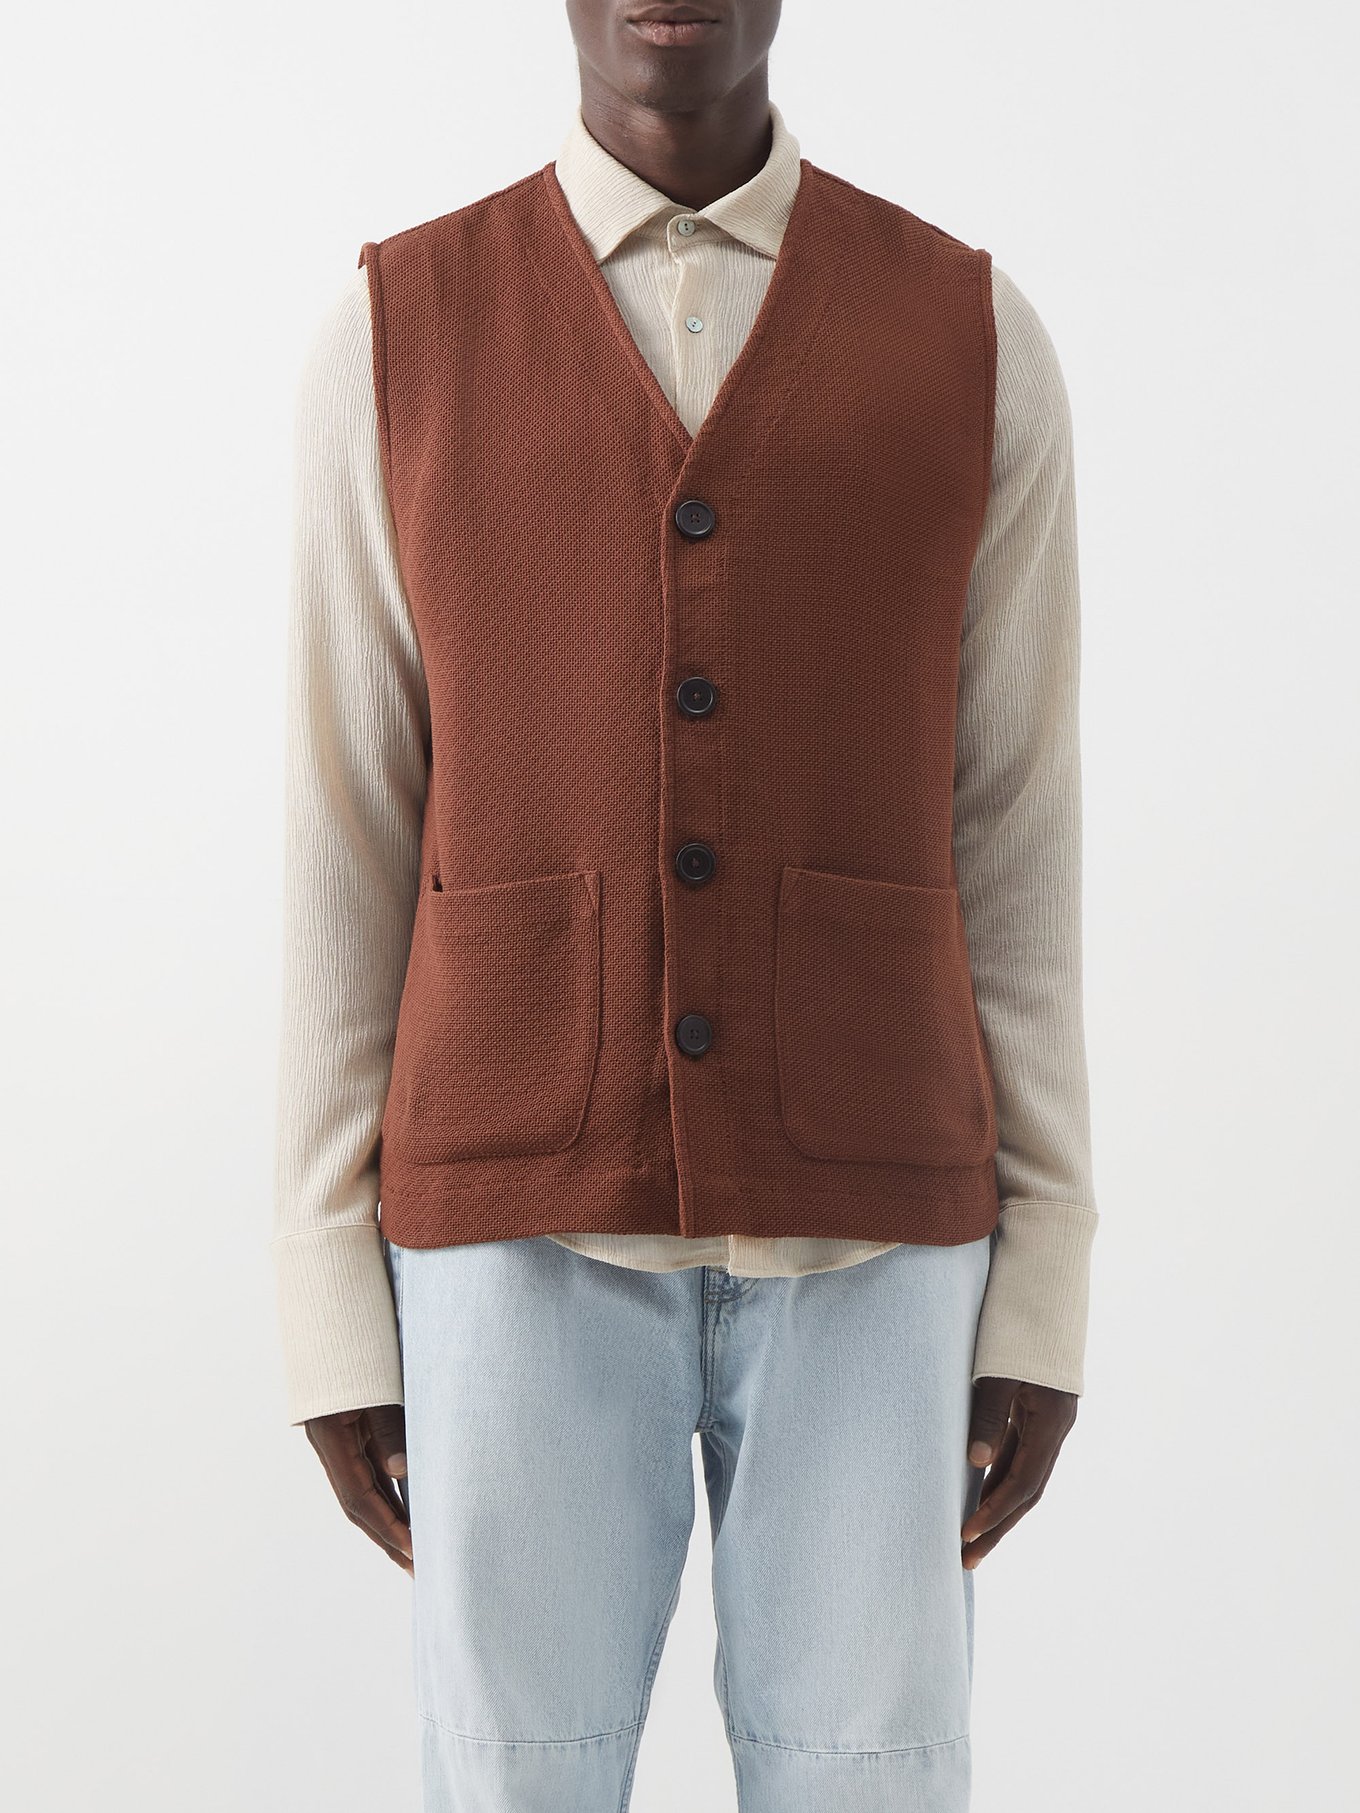 Knitted cardigan sweater vest | Our Legacy